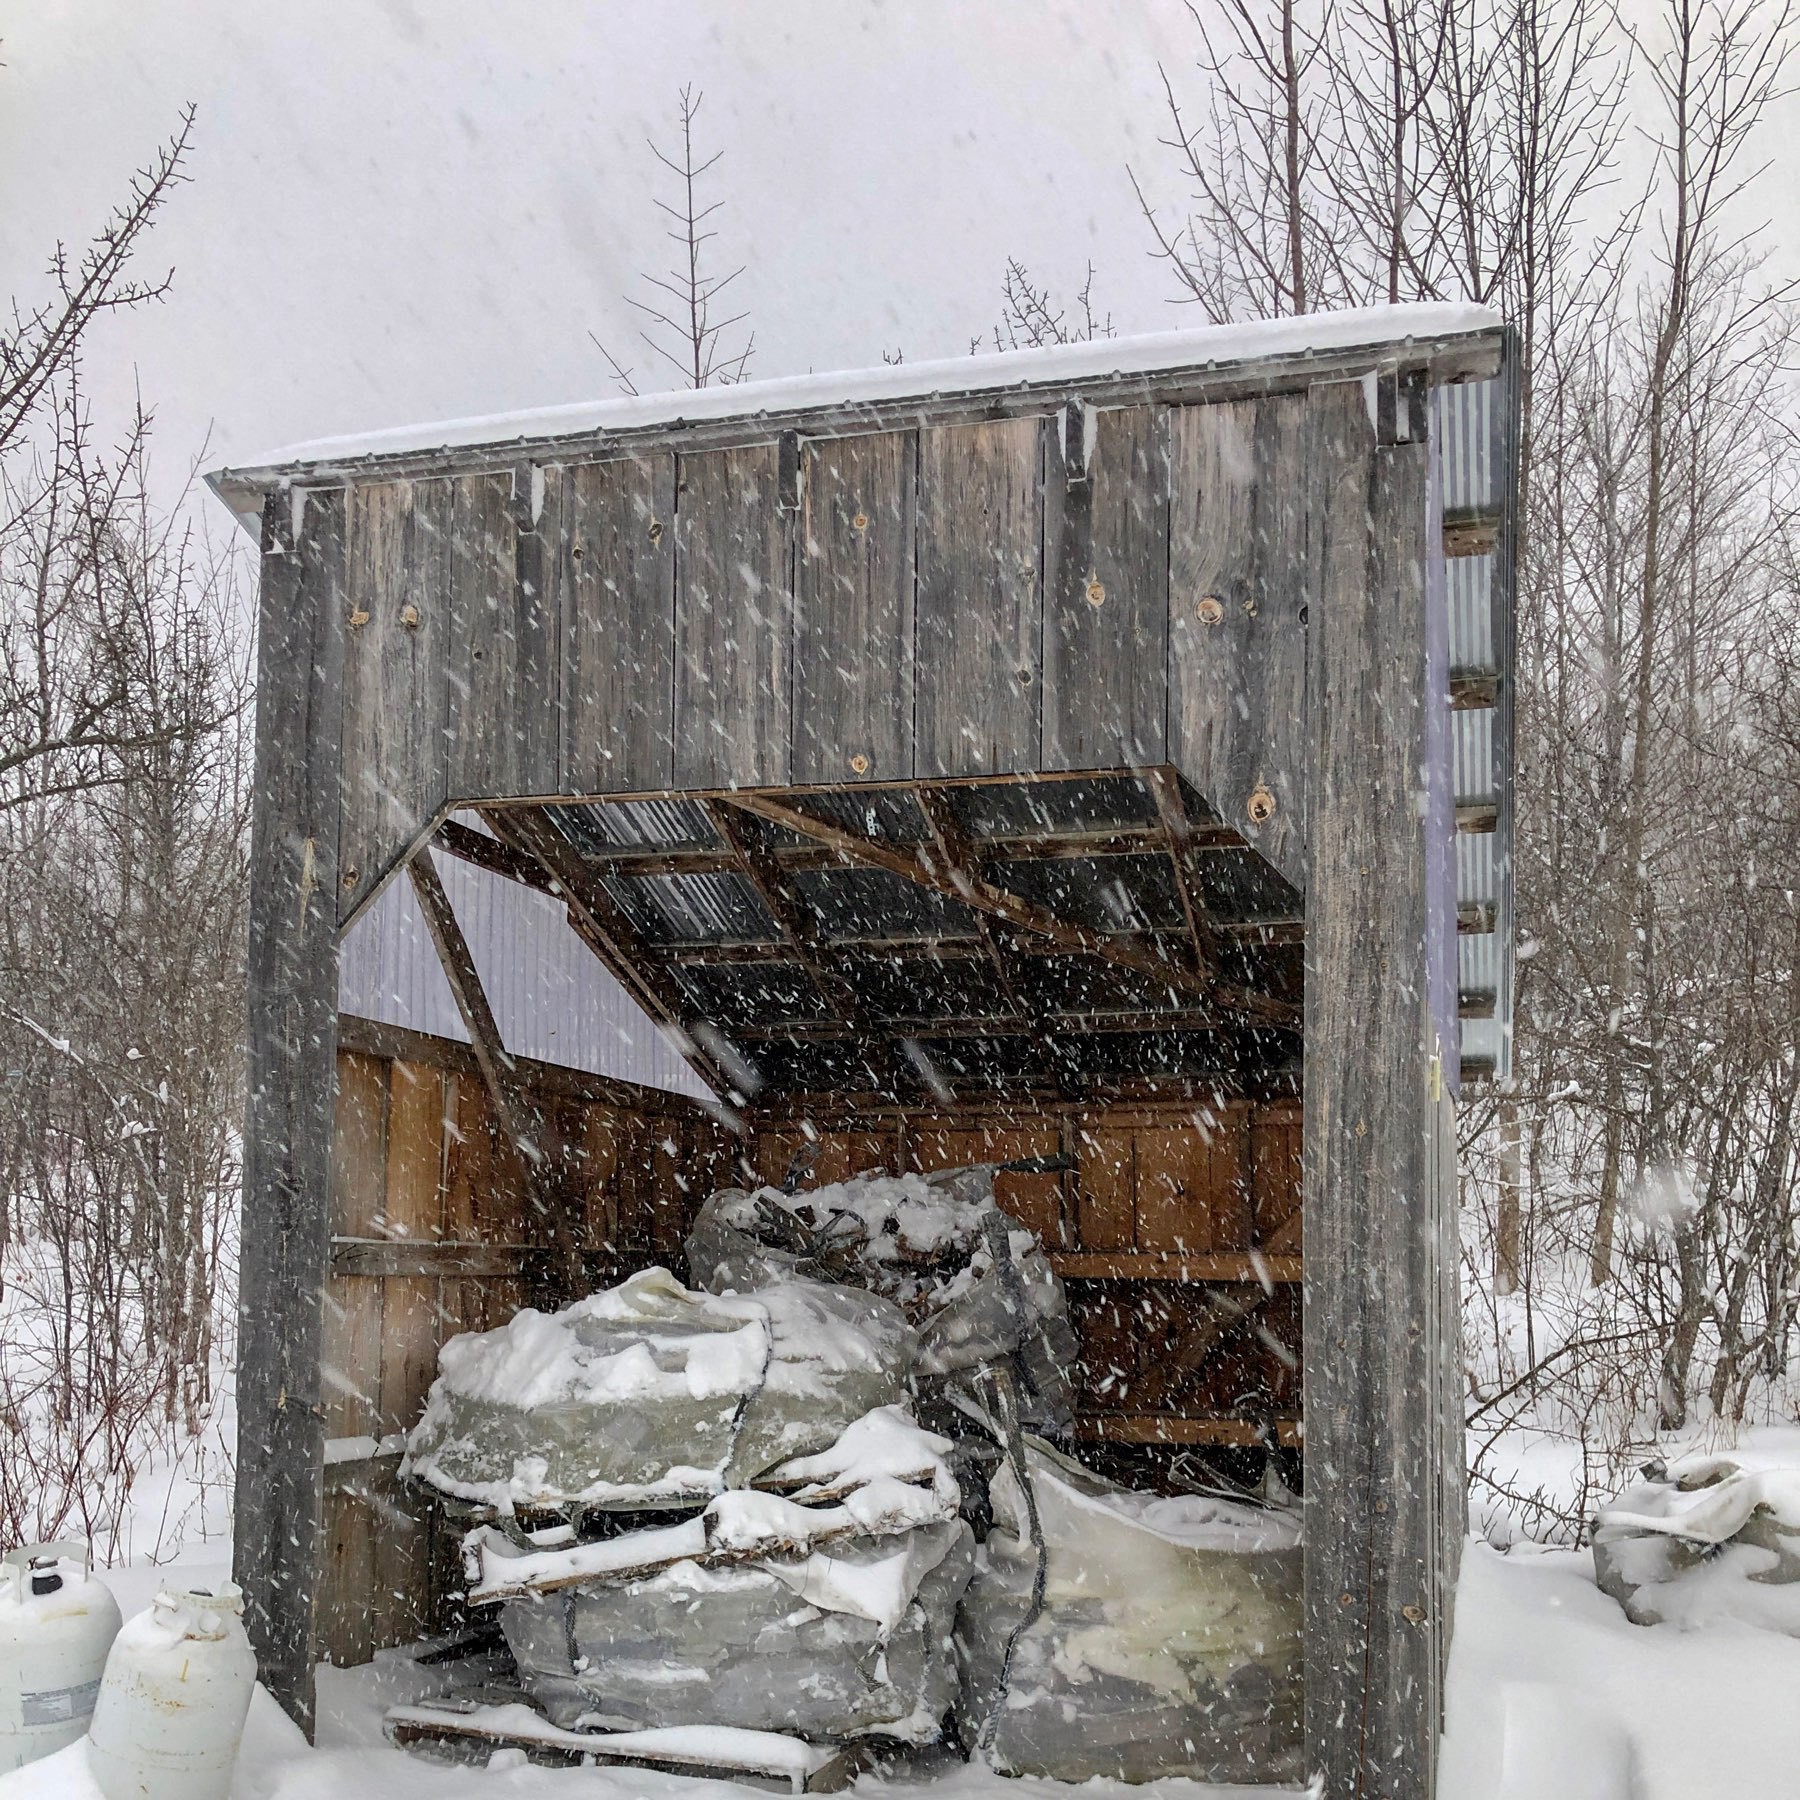 large bags of firewood inside a shelter with snow falling